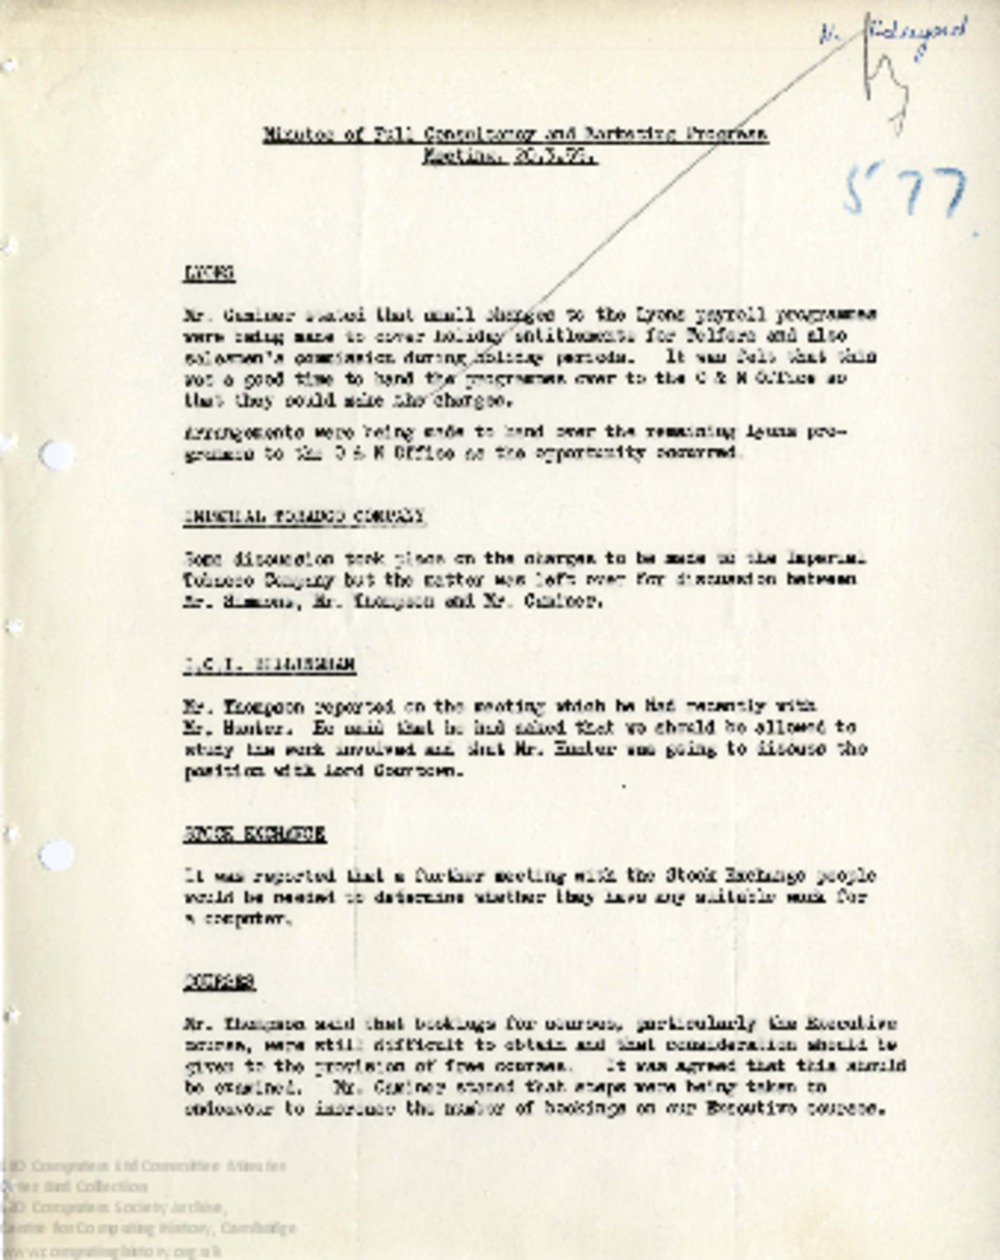 Article: 64473 Consultancy and Marketing Progress Minutes and Full Report, 20th Mar 1959